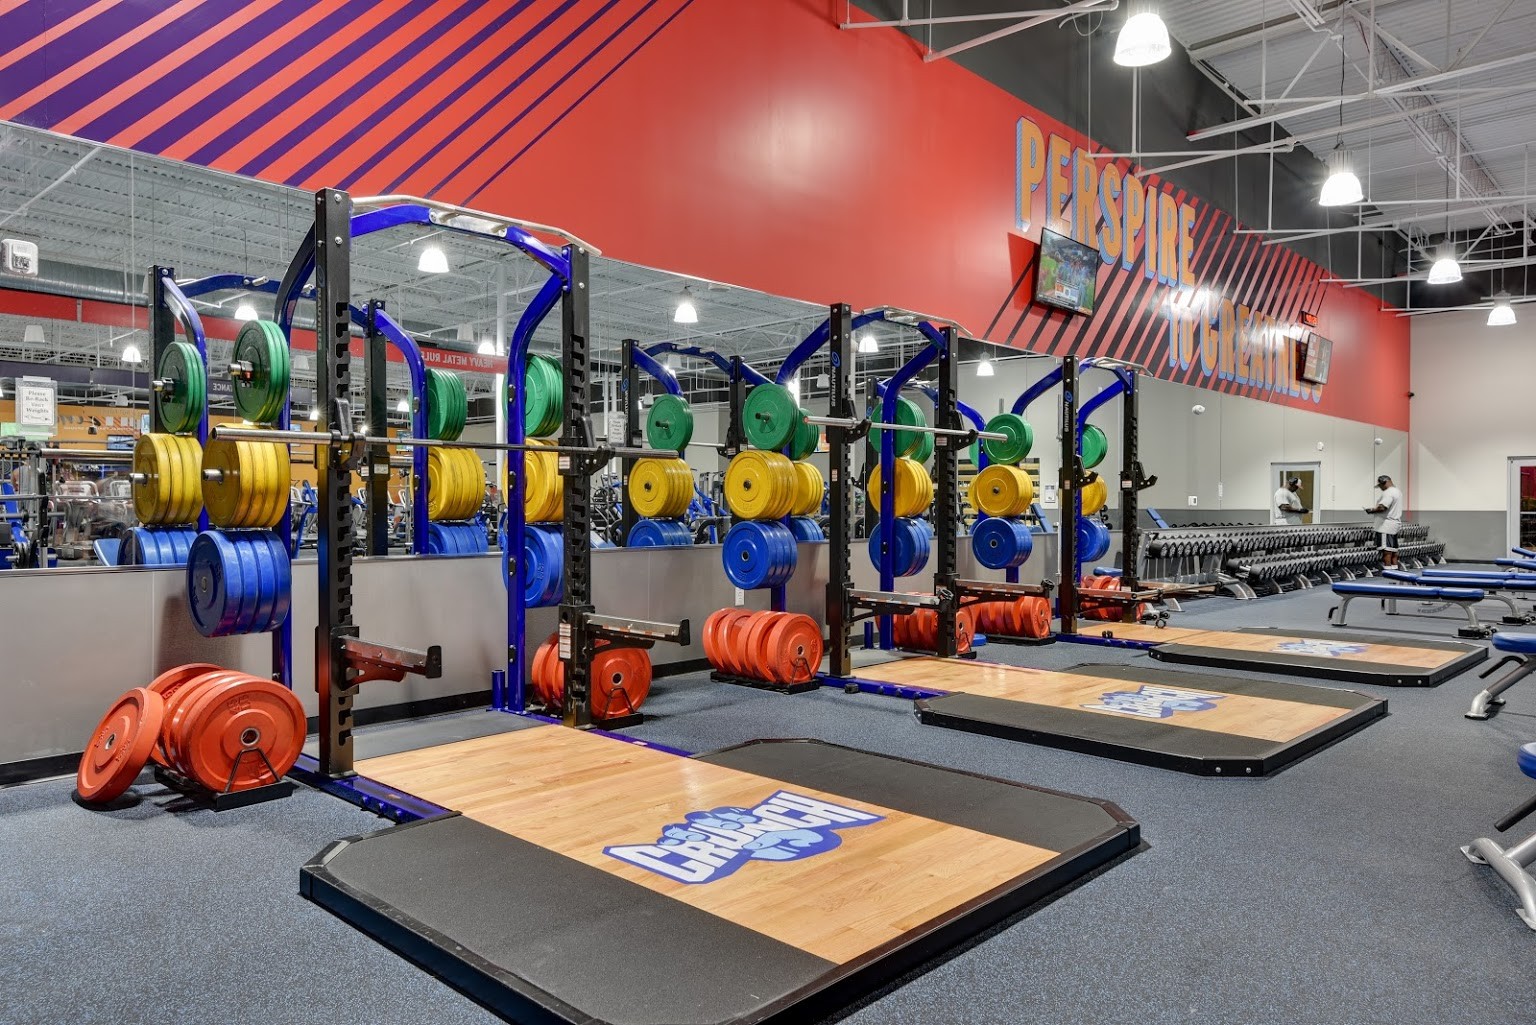 https://merchantview360.com/wp-content/uploads/2019/11/squat-rack-at-Crunch-Fitness-fitness-gym-in-Raleigh-NC.jpg